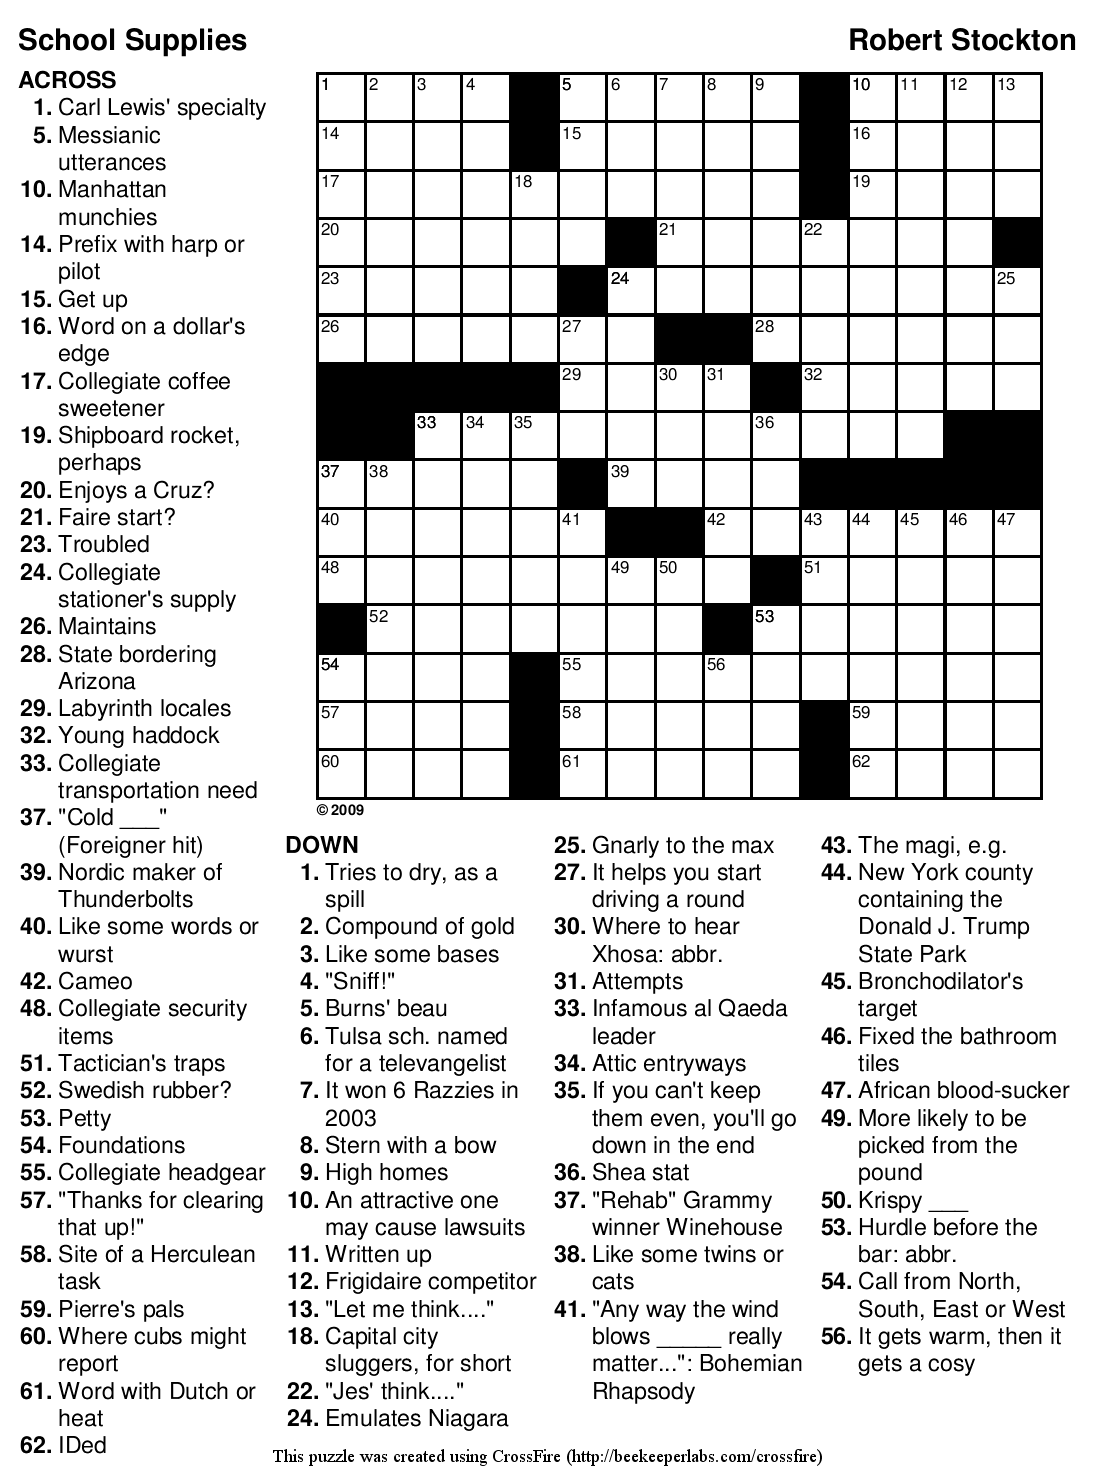 Free Printable Online Crossword Puzzles New York Times